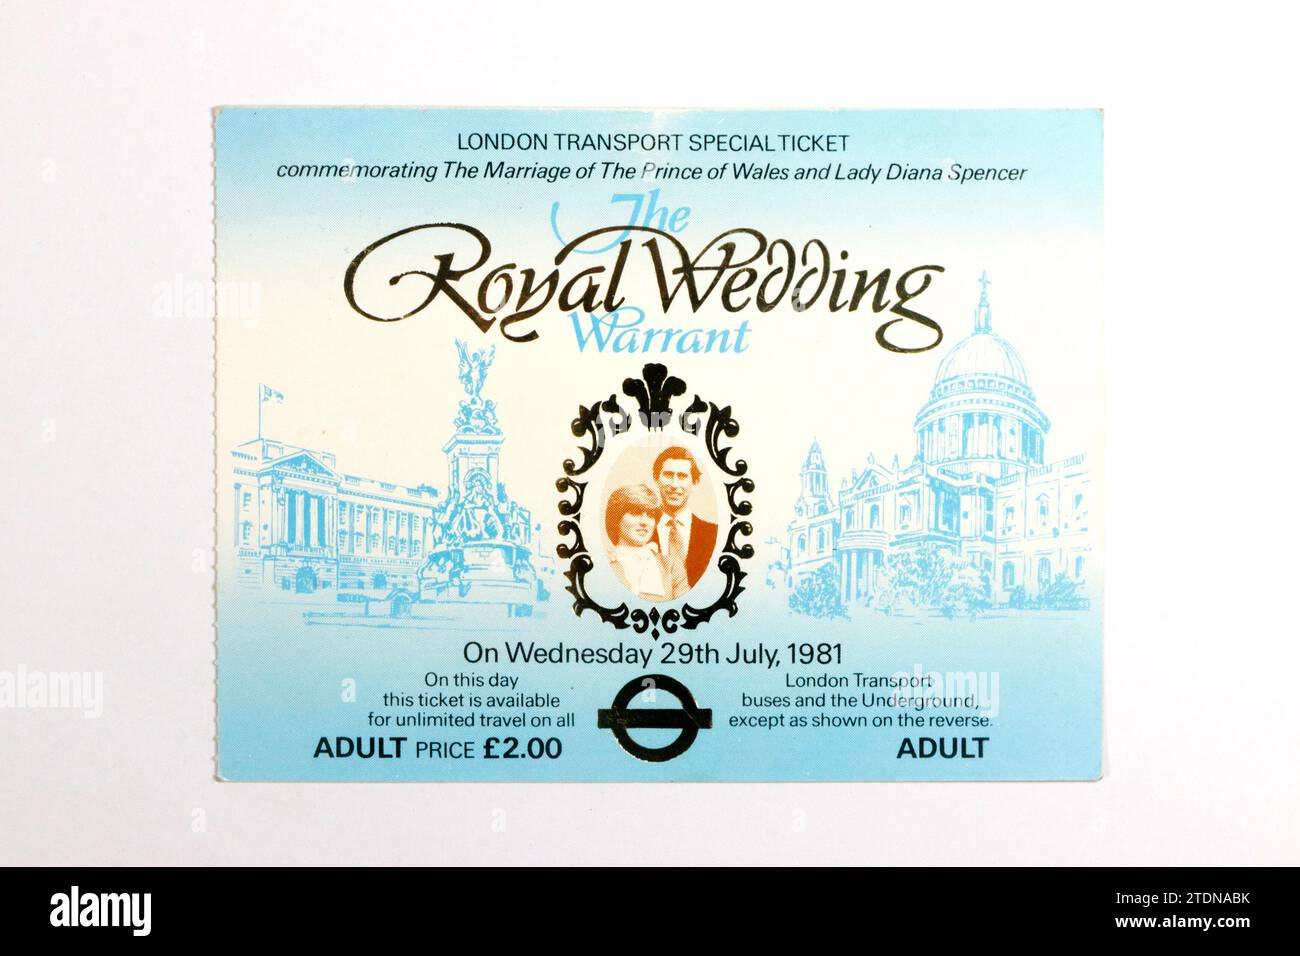 london transport special ticket commemorating royal wedding prince charles diana spencer underground buses 1981 isolated on white studio background Stock Photo